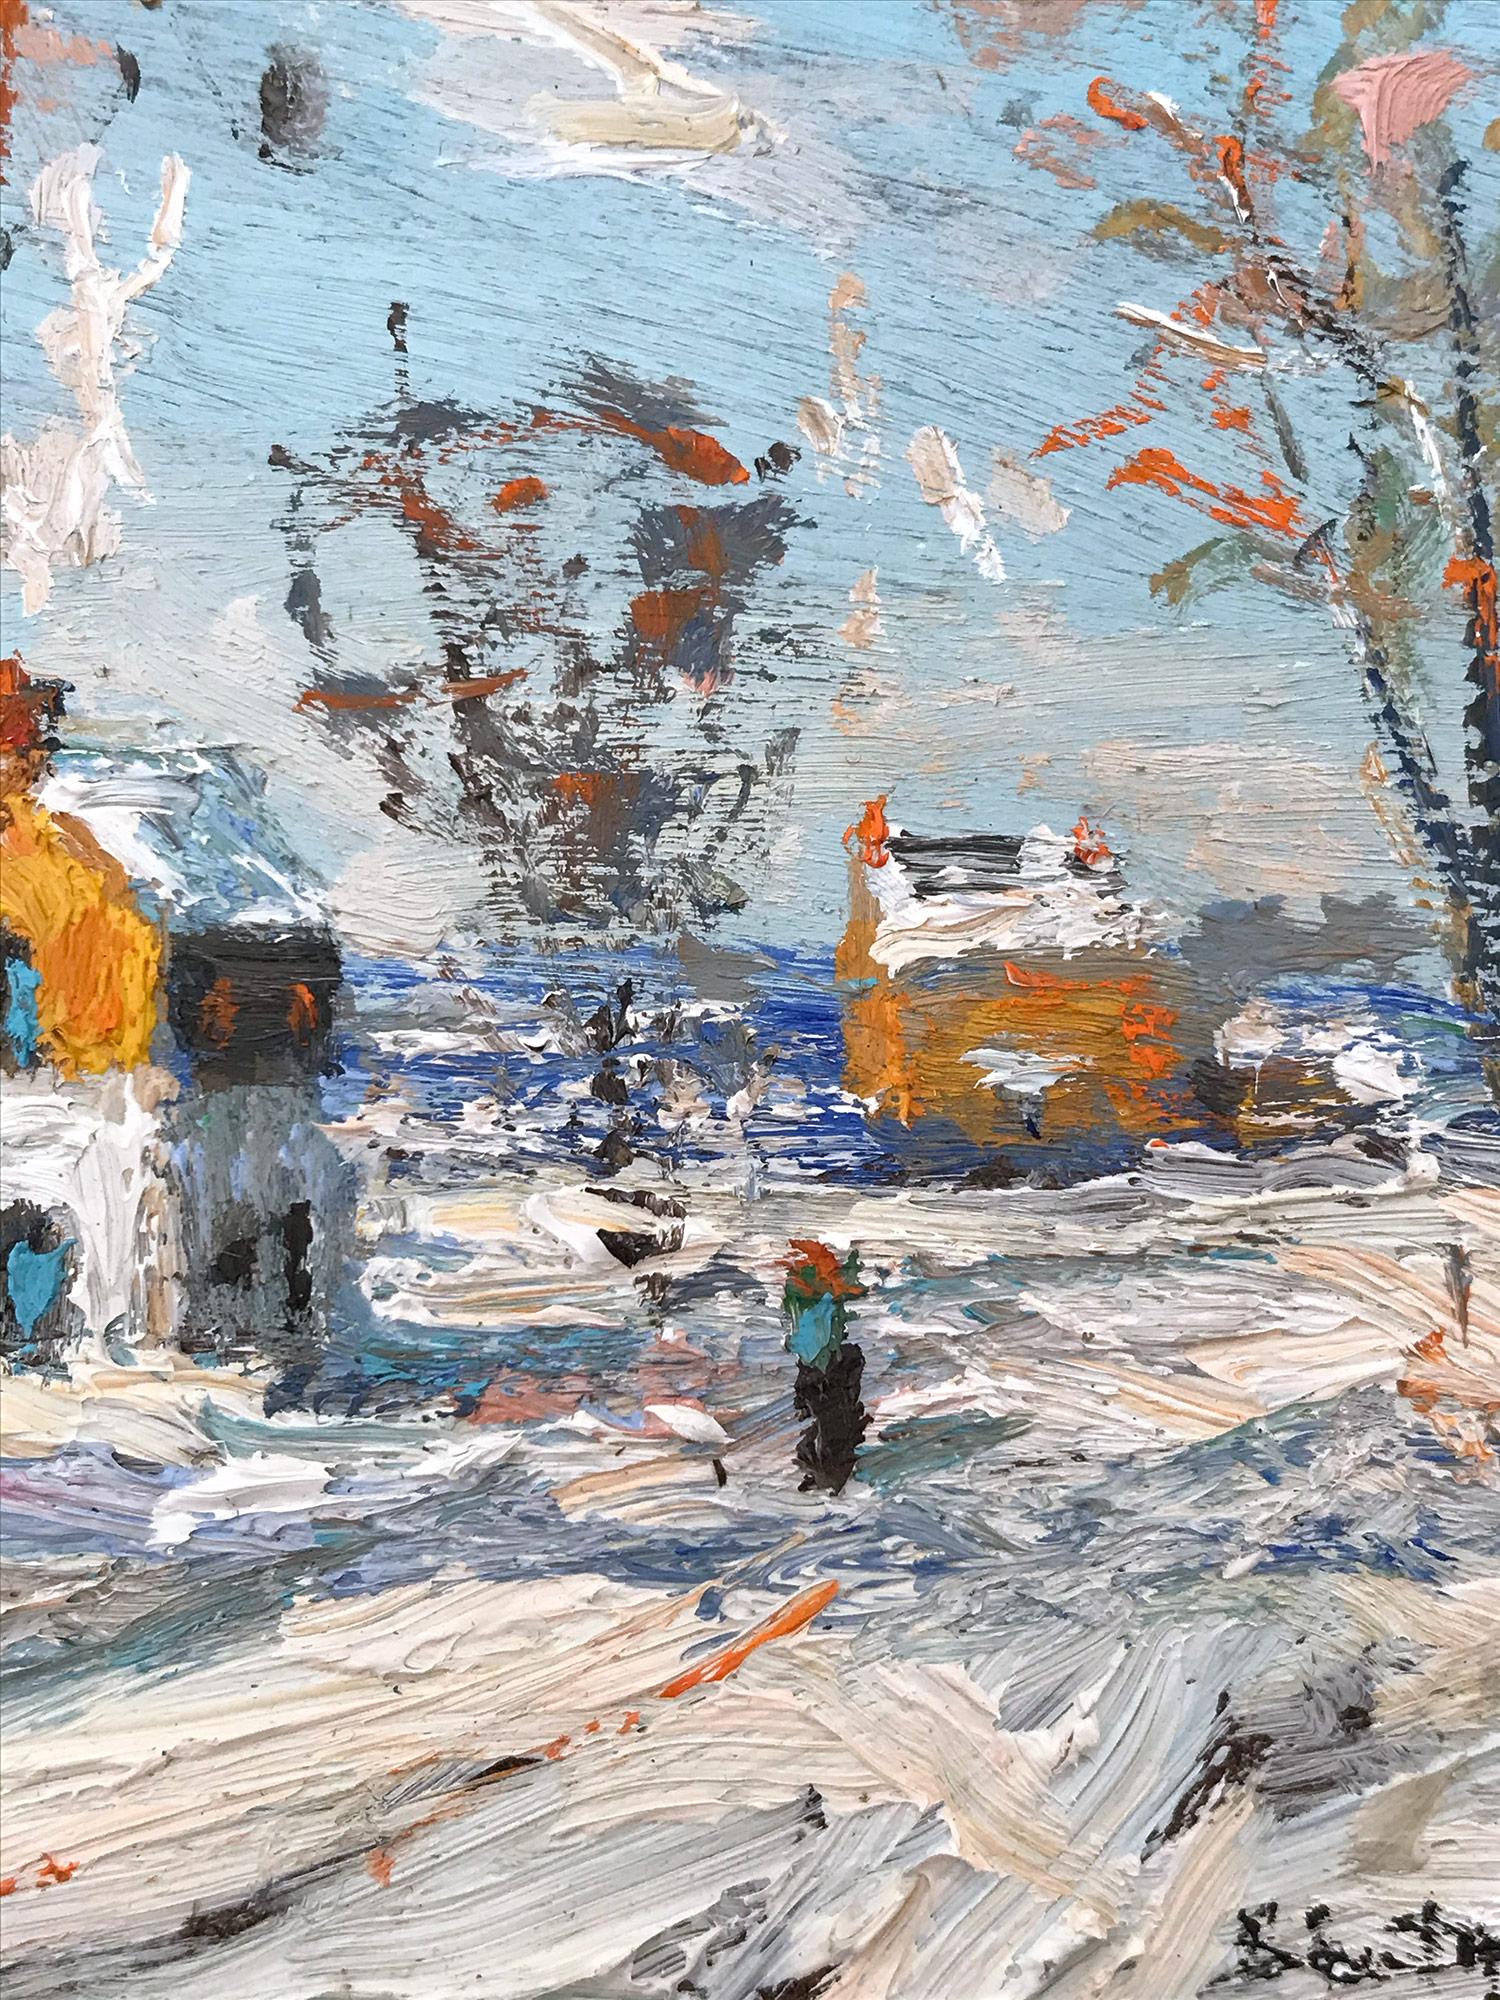 Impressionist winter pastoral scene of a quaint snow covered farm houses near Dublin, Bucks County, PA. Willet has portrayed this piece in a most intimate, yet energetic way, and has packed much feeling into this miniature work. It is almost as if